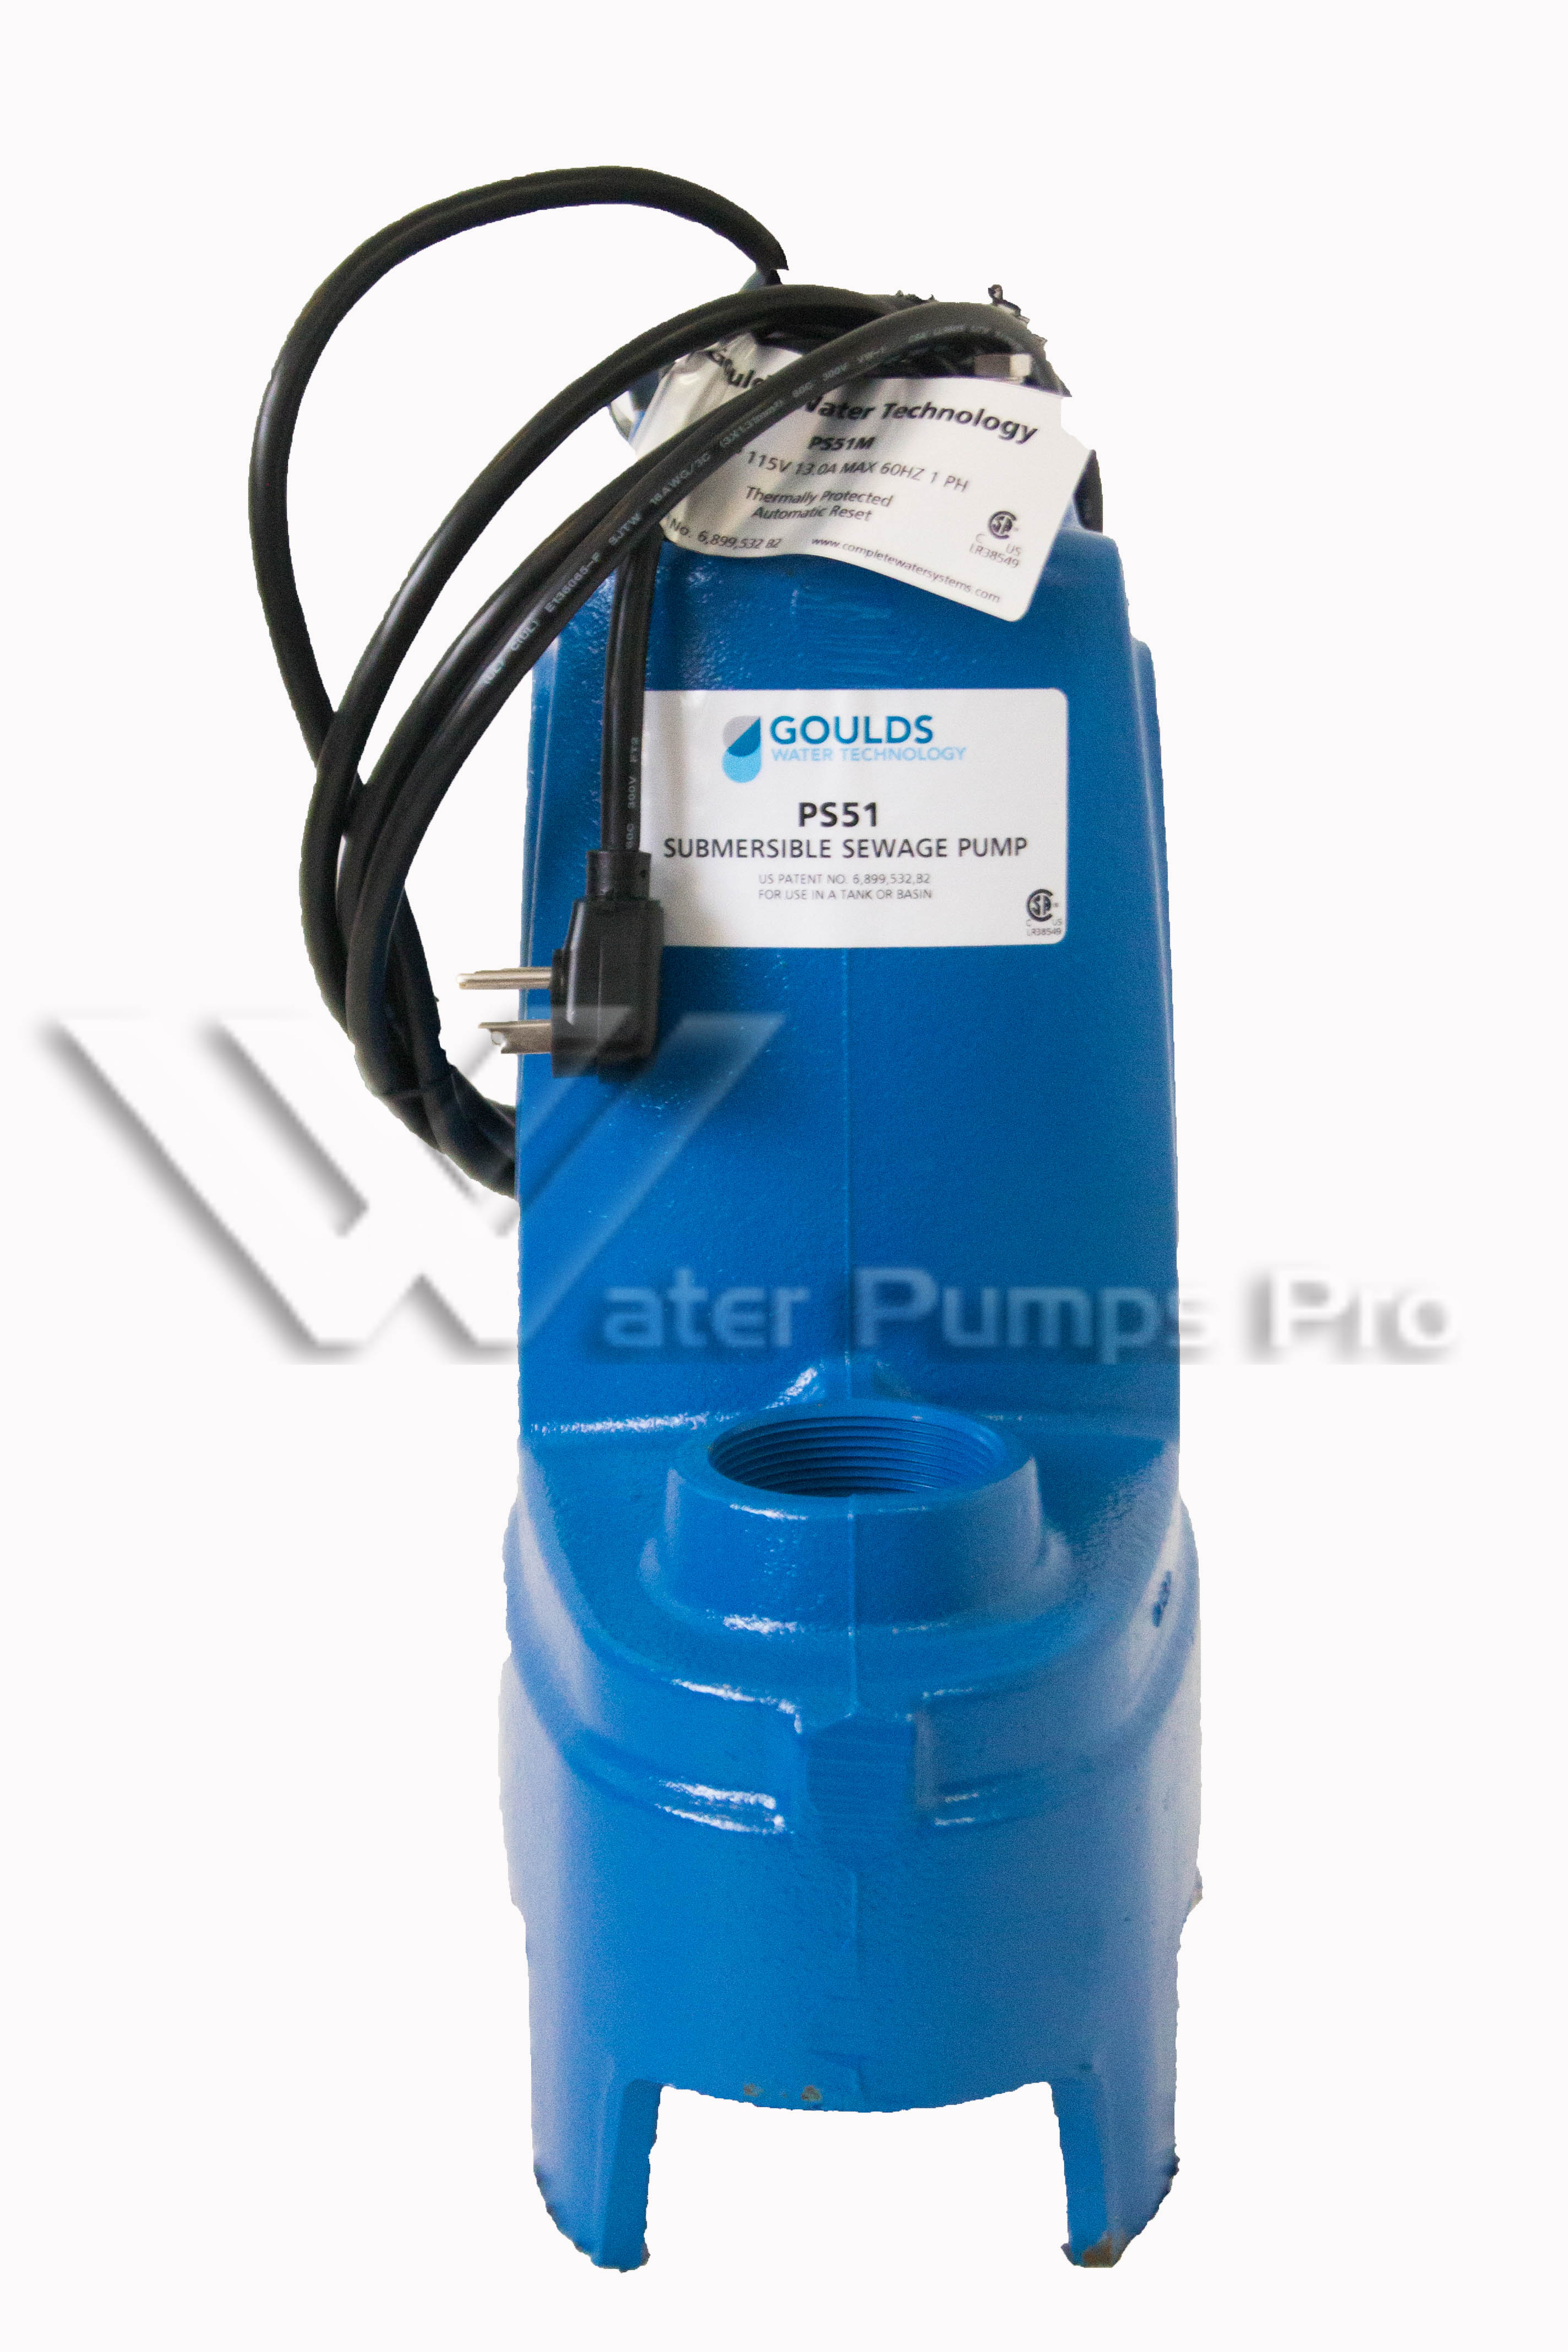 Goulds PS51M Submersible Sewage Pump 1/2HP 115V